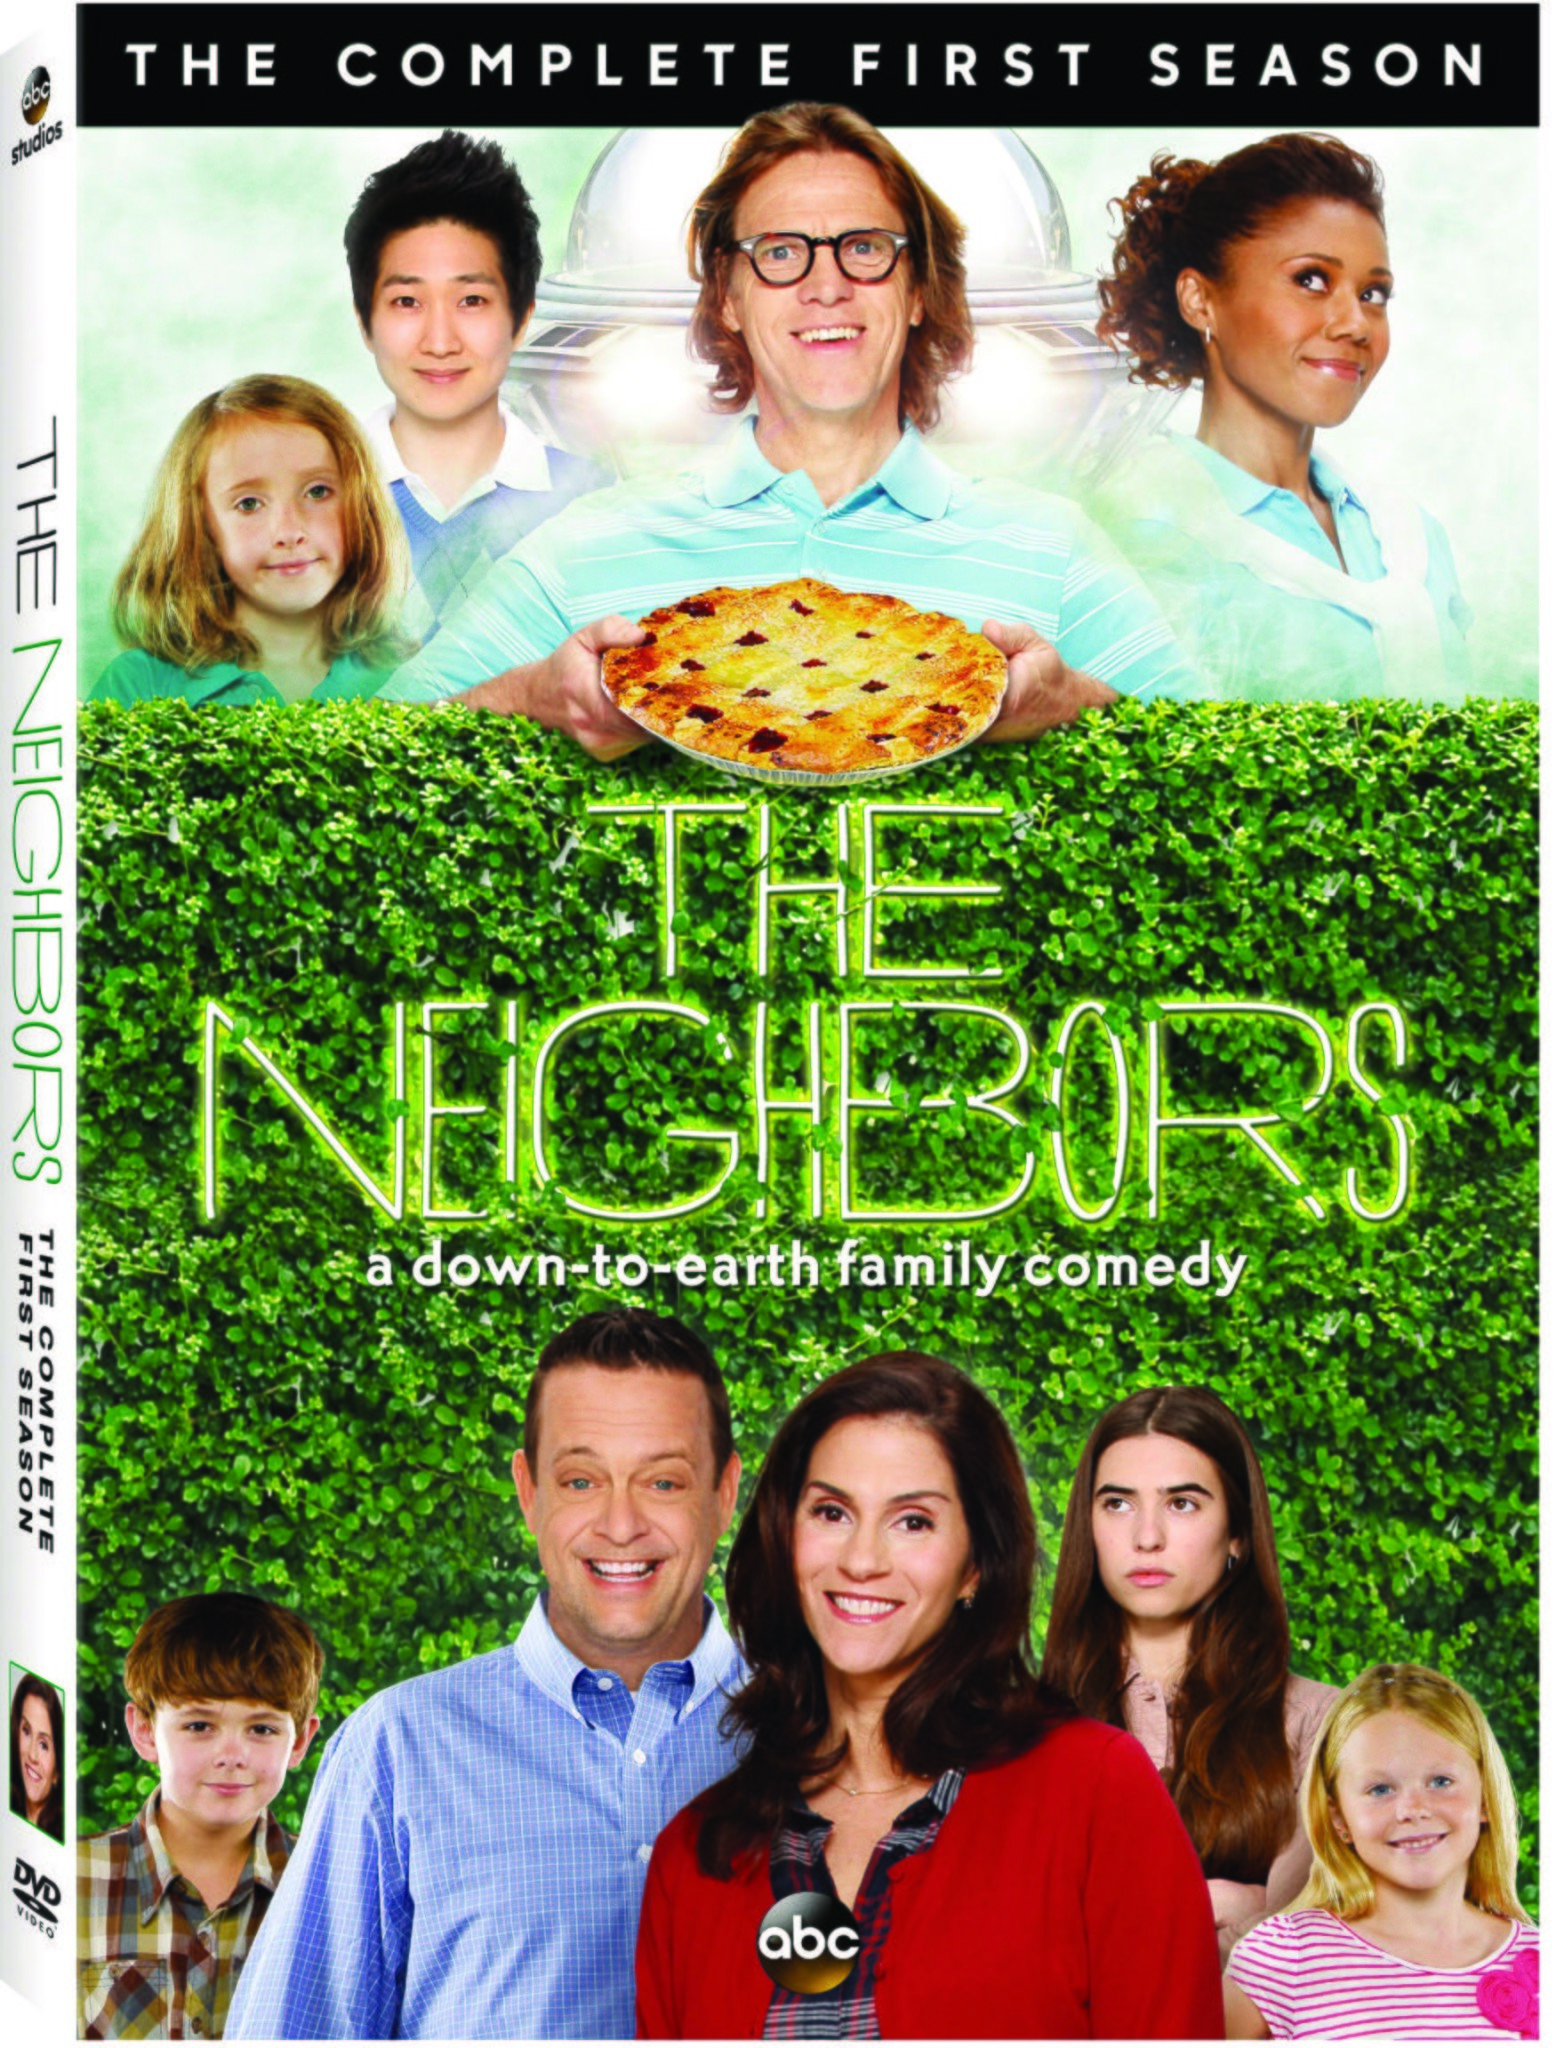 ‘The Neighbors: The Complete First Season’ Comes to DVD on September 24, 2013